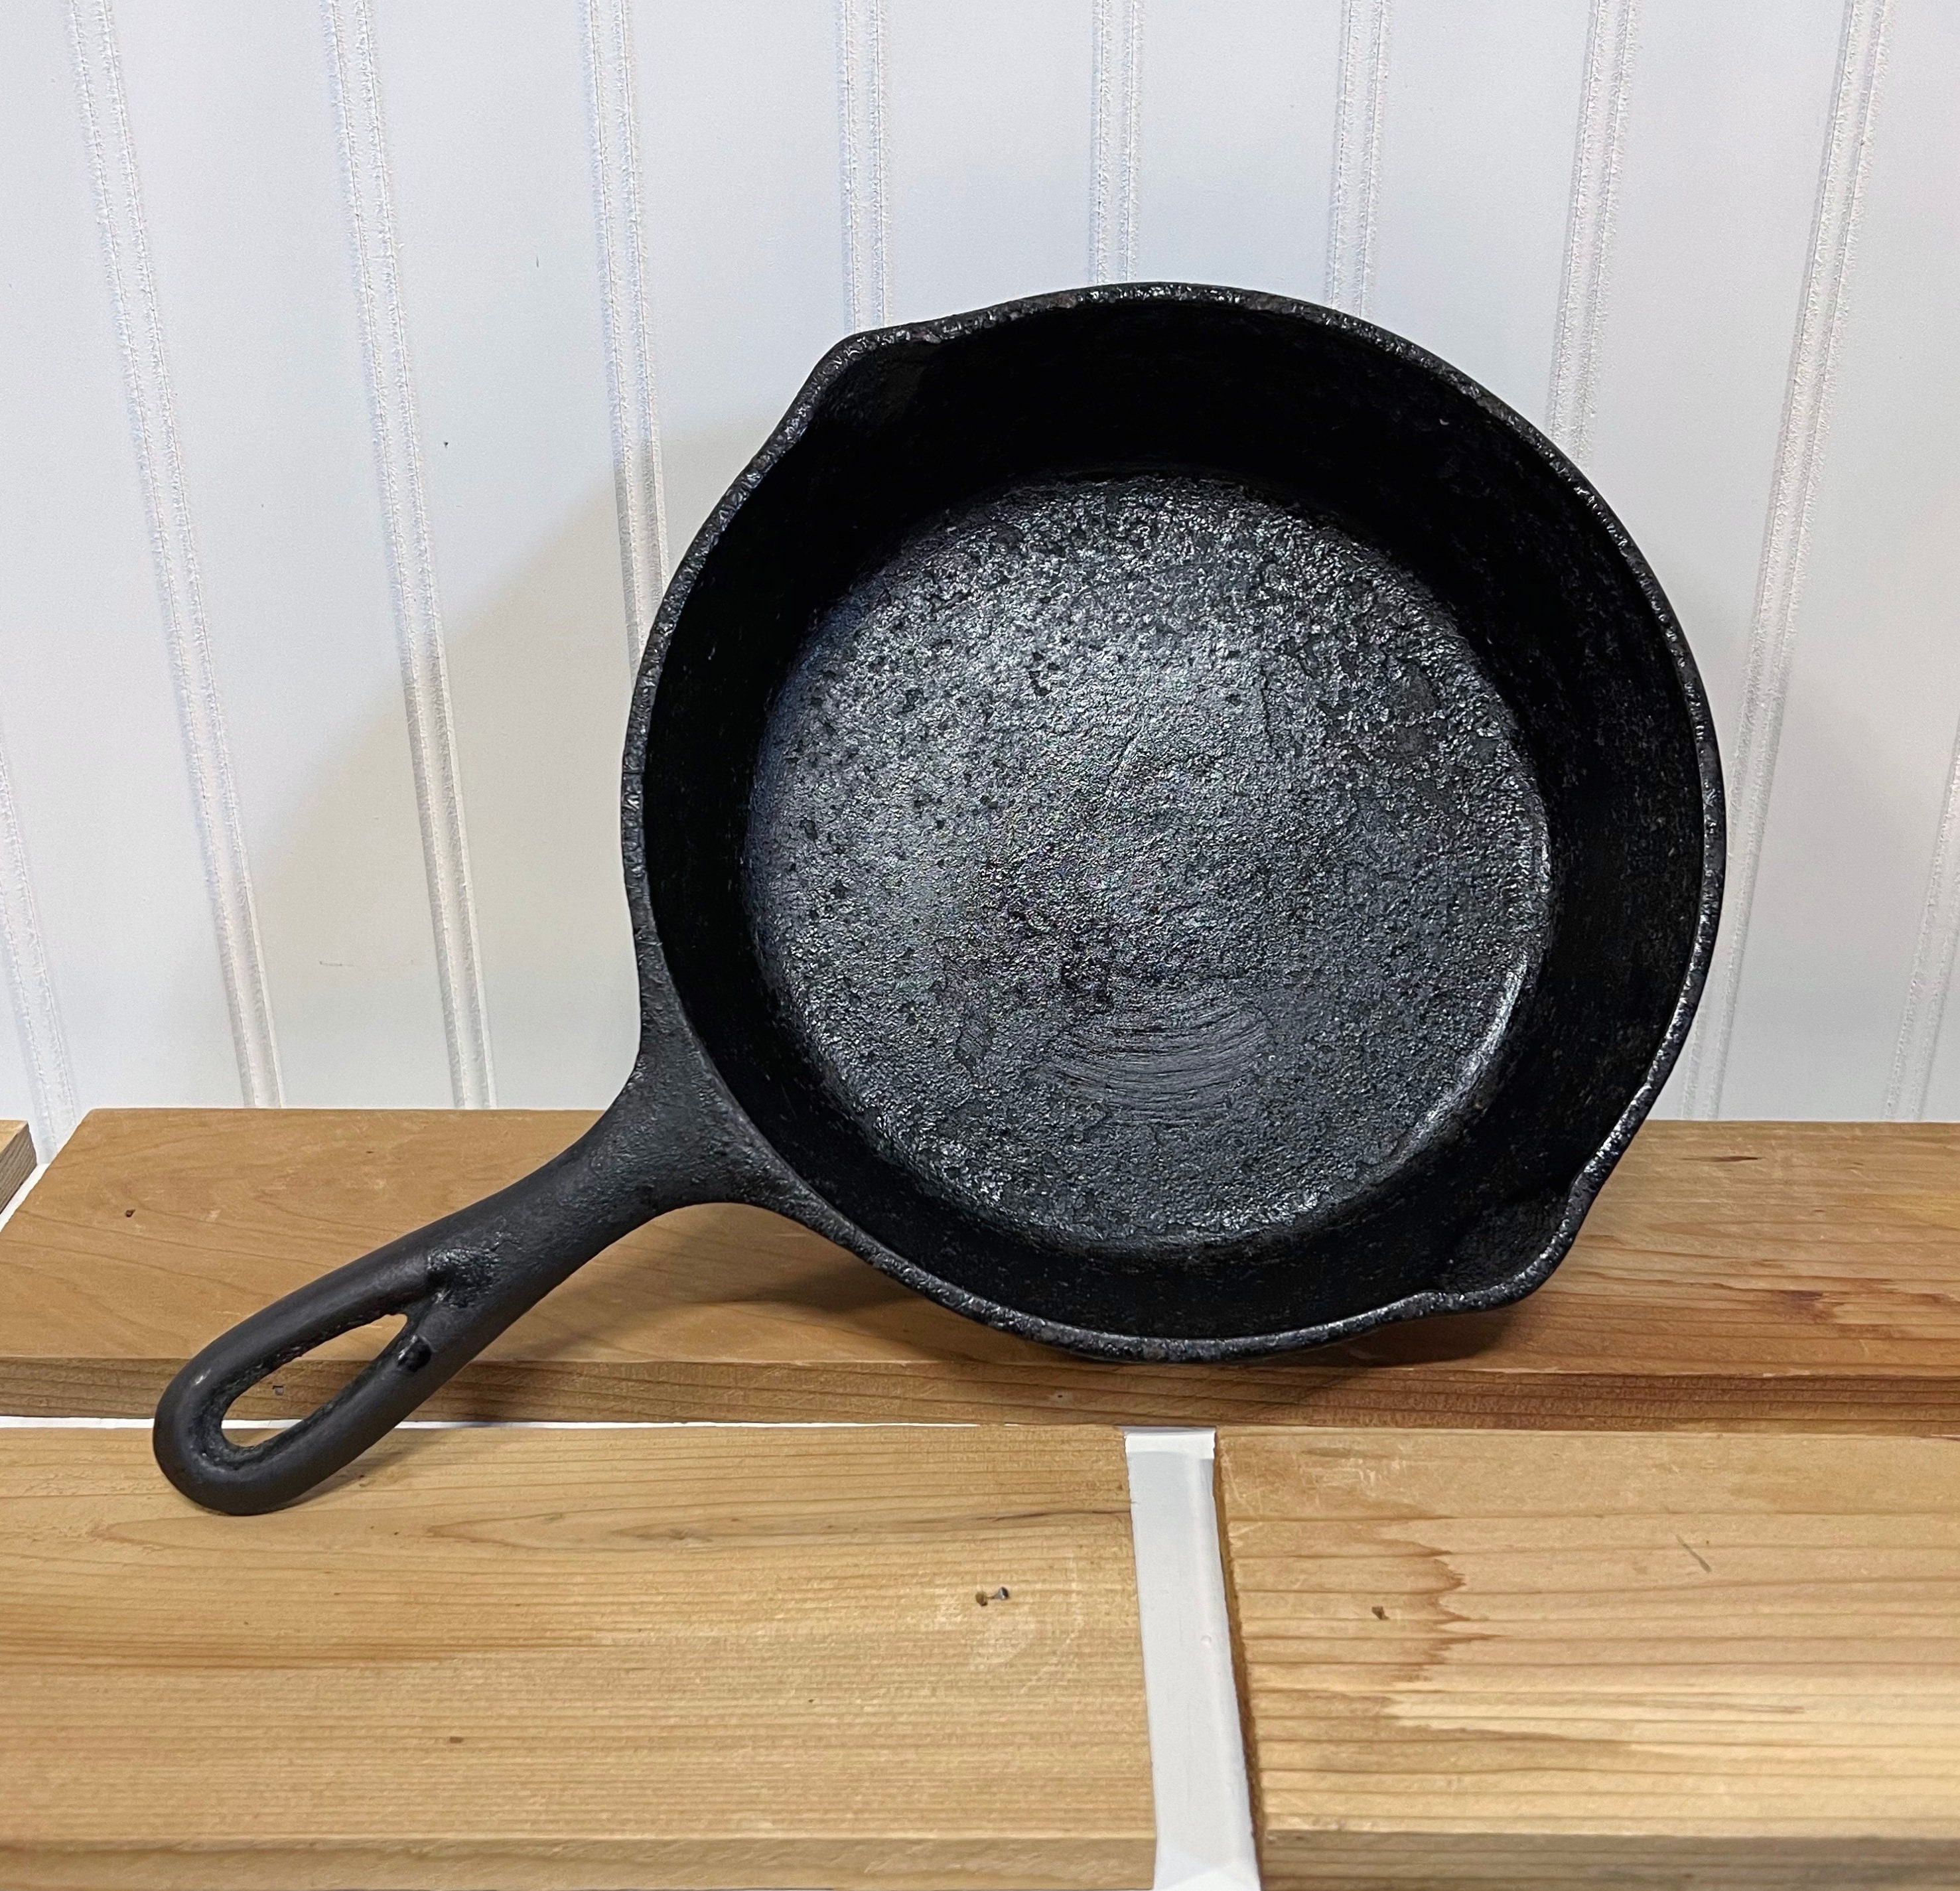 40s-50s Skillet Cast Iron Double Pour Spout Flat Bottom & Marked 9 Inch  Skillet Made in U S A 8 7/8 9 3/8 X 2h VINTAGE NICE See Photos 